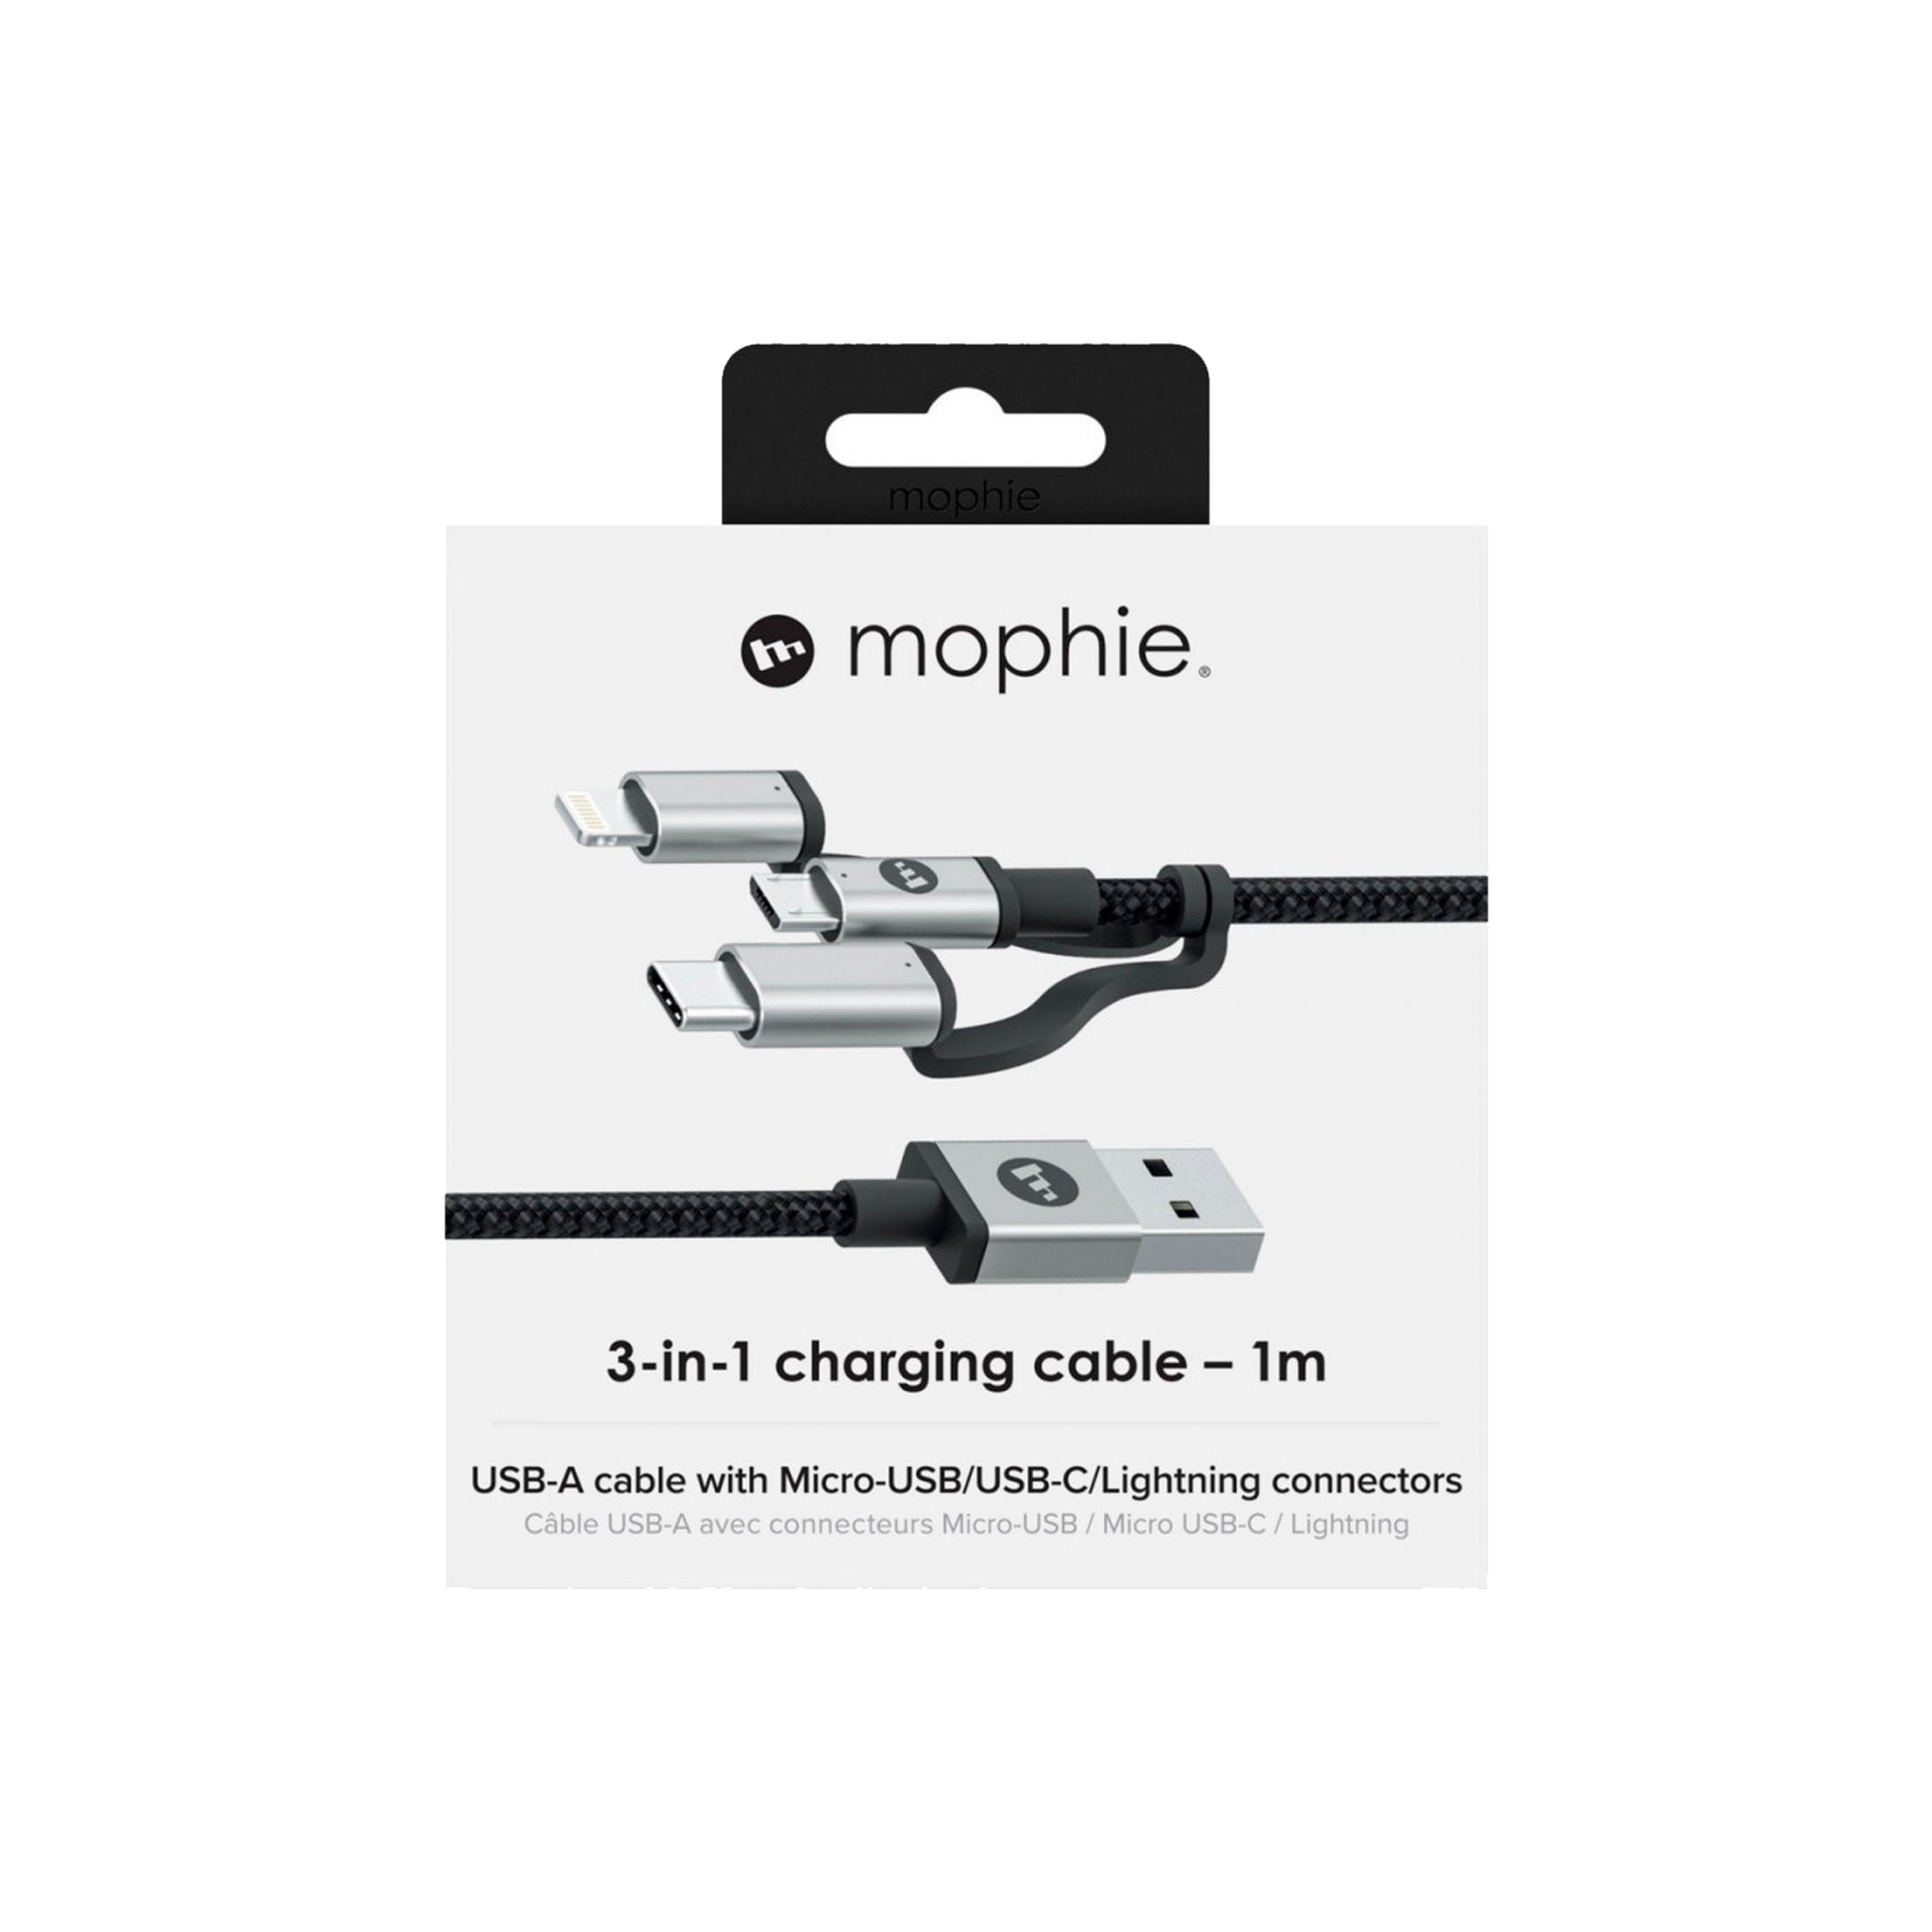 mophie, Mophie - Tri Tip Cable 3ft - Black